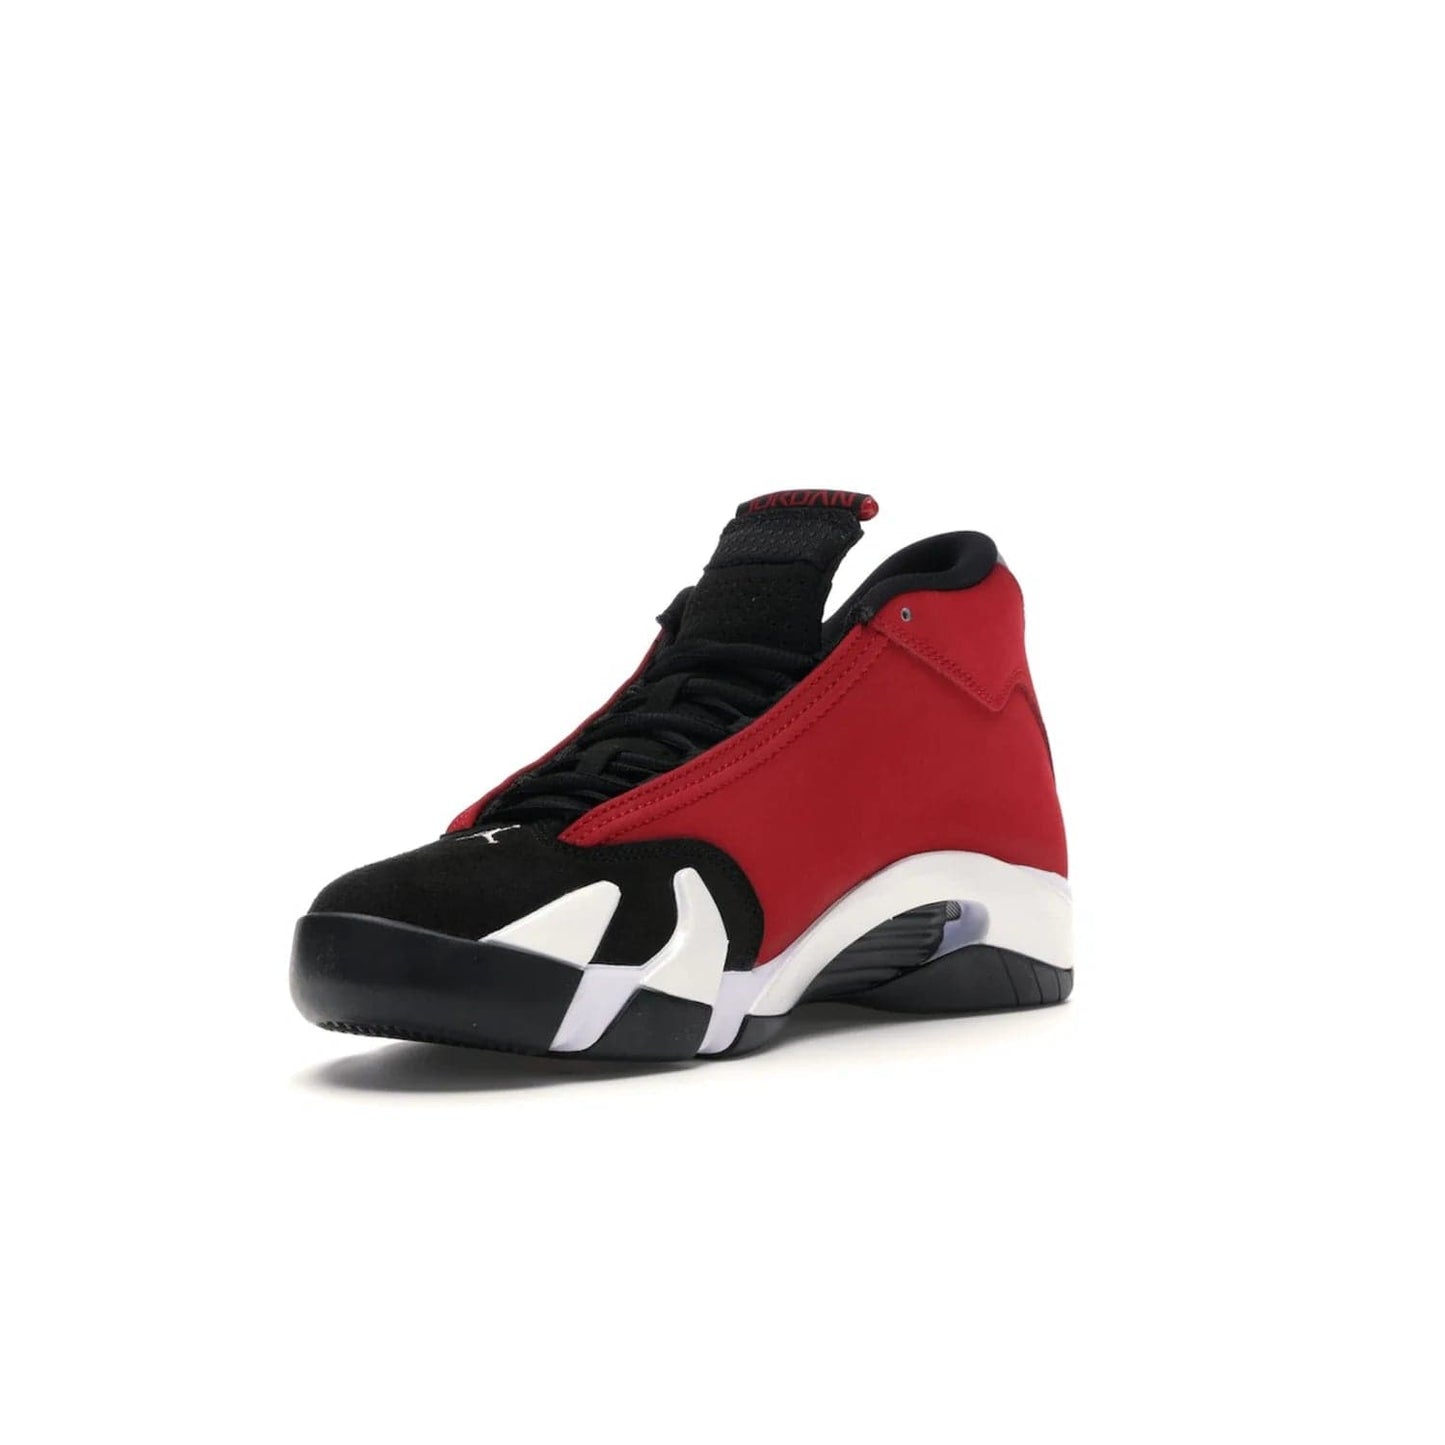 Jordan 14 Retro Gym Red Toro - Image 14 - Only at www.BallersClubKickz.com - Feel the Chicago Bulls energy with the Jordan 14 Retro Gym Red Toro! Black, red, and white design unites performance and fashion. Get your hands on this limited edition Jordan and show off your style today.